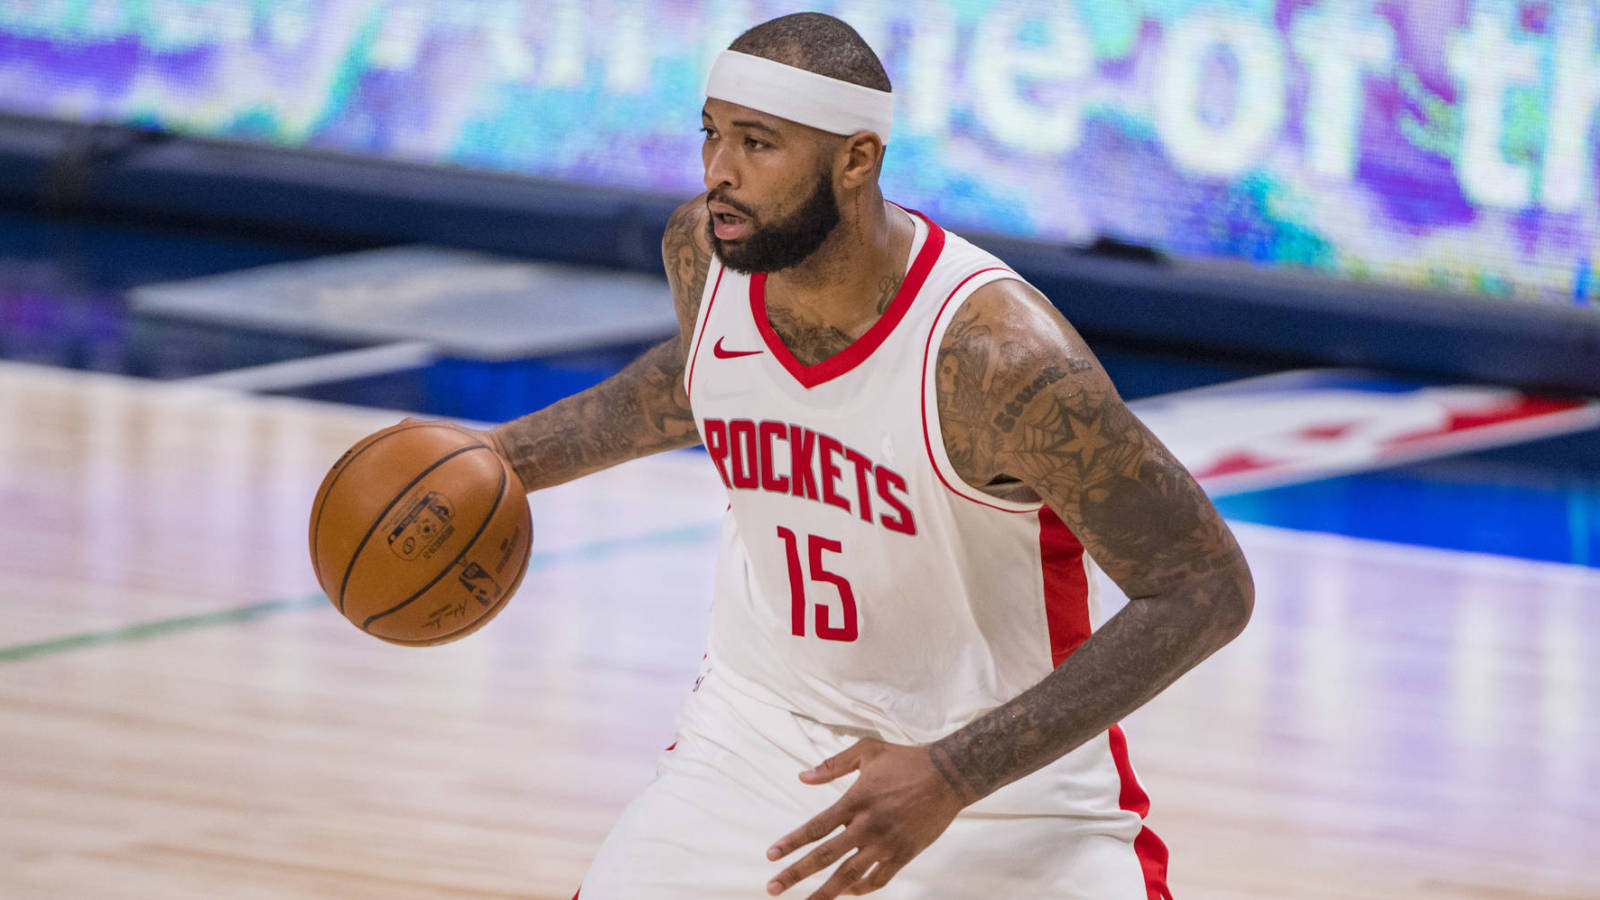 Jan 23, 2021; Dallas, Texas, USA; Houston Rockets center DeMarcus Cousins (15) looks to pass the ball during the second half against the Dallas Mavericks at the American Airlines Center. Mandatory Credit: Jerome Miron-USA TODAY Sports